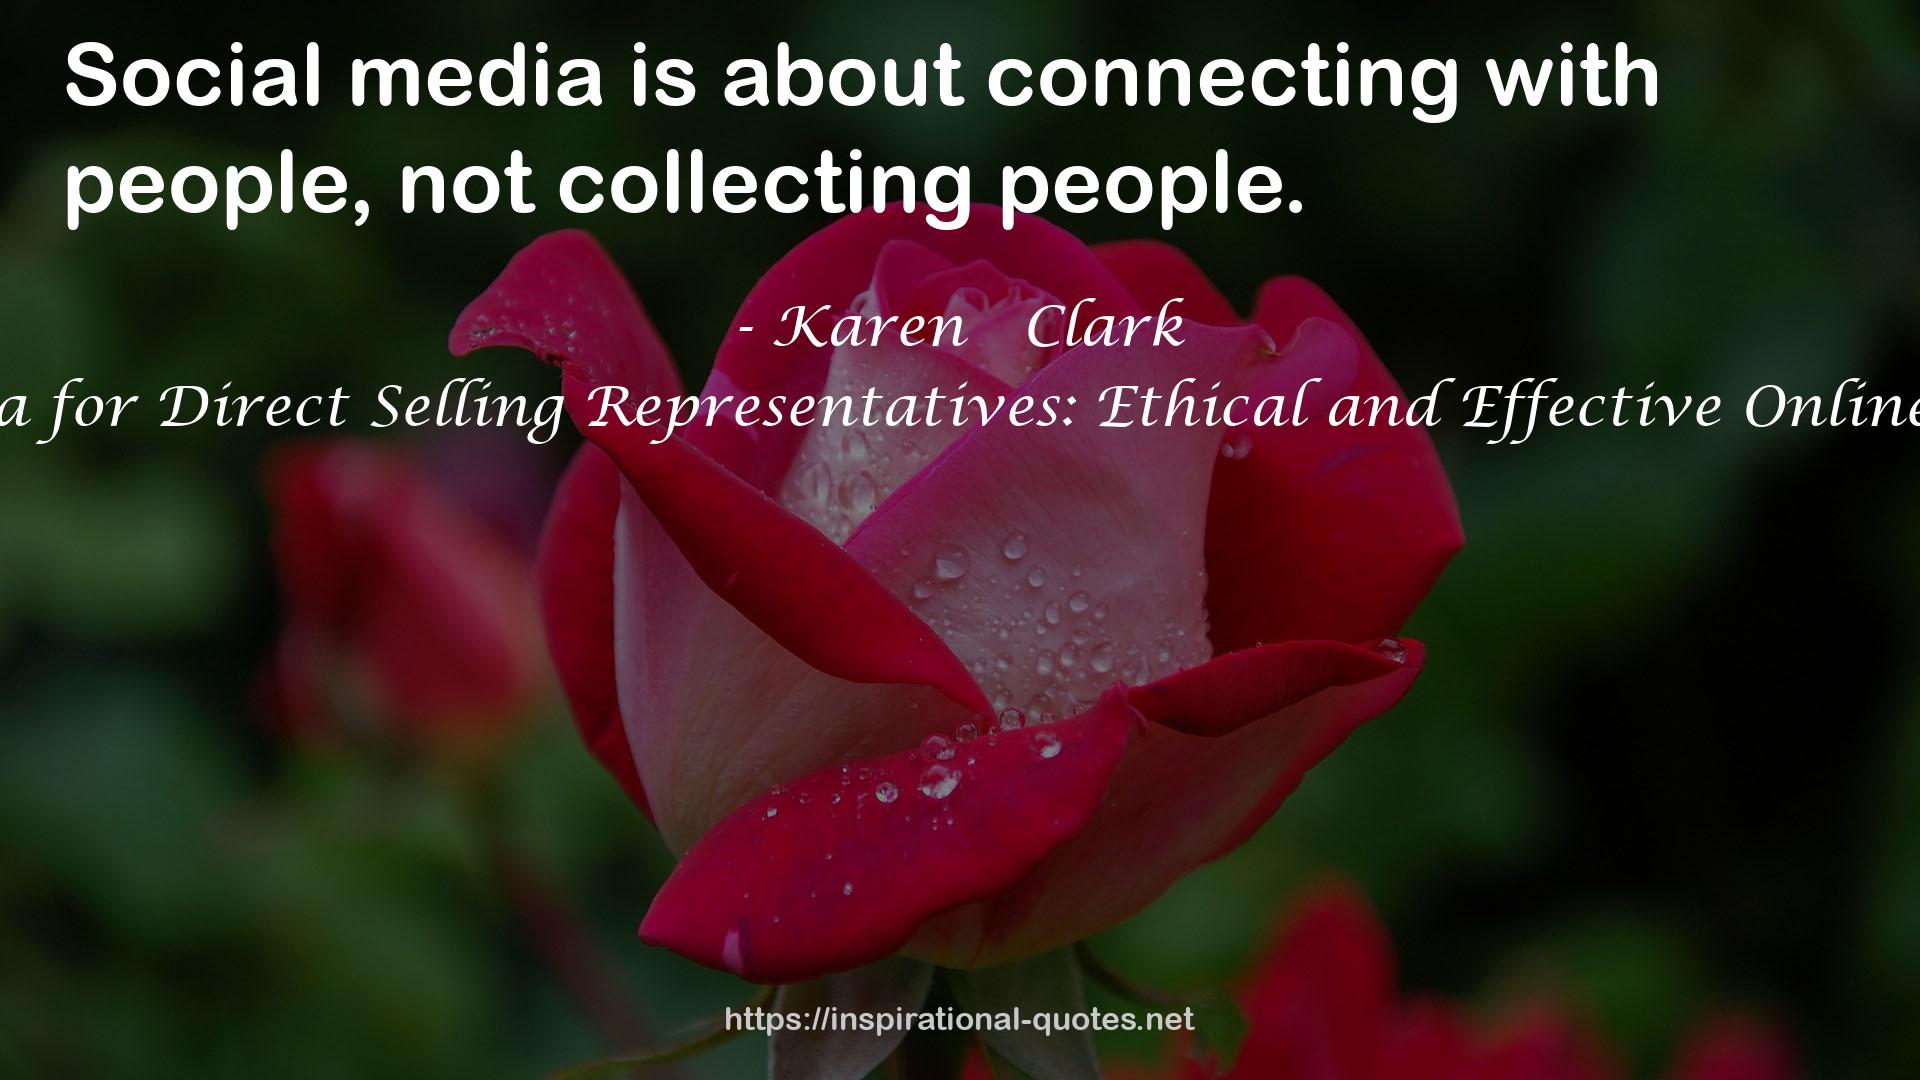 Social Media for Direct Selling Representatives: Ethical and Effective Online Marketing QUOTES